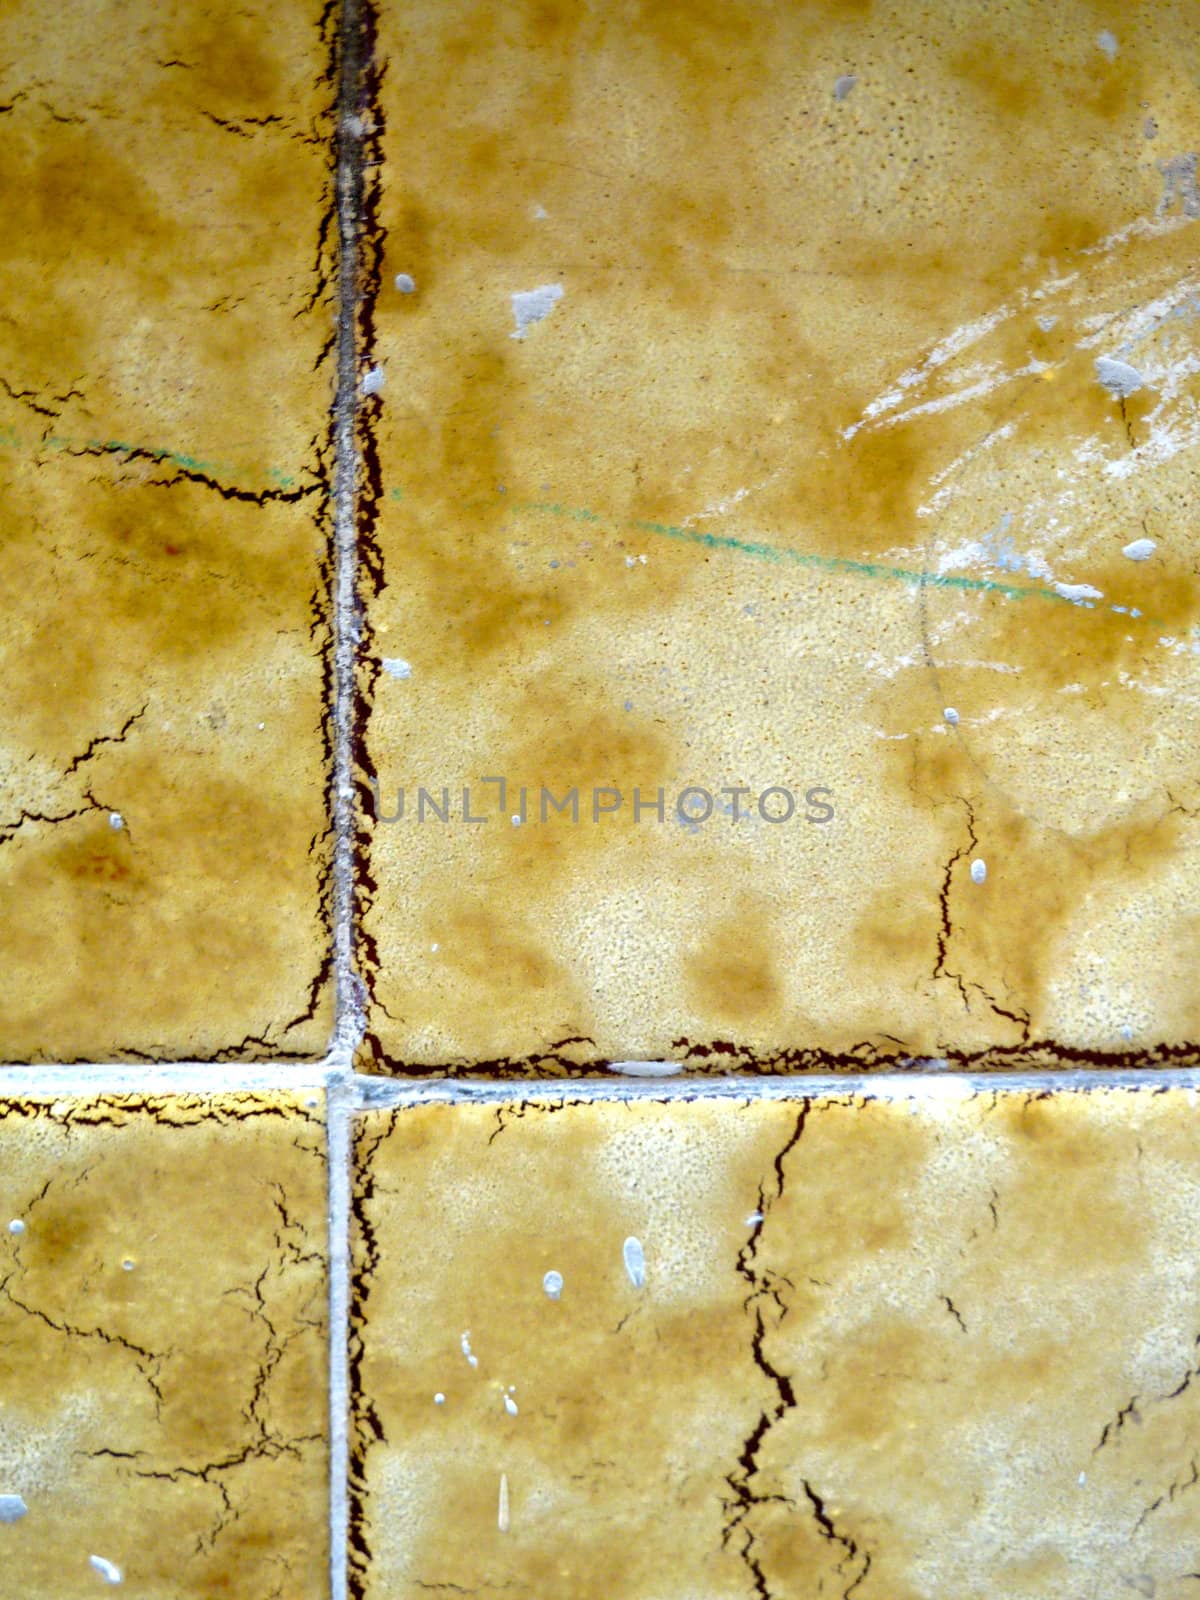 joints between yellow tiles as a background